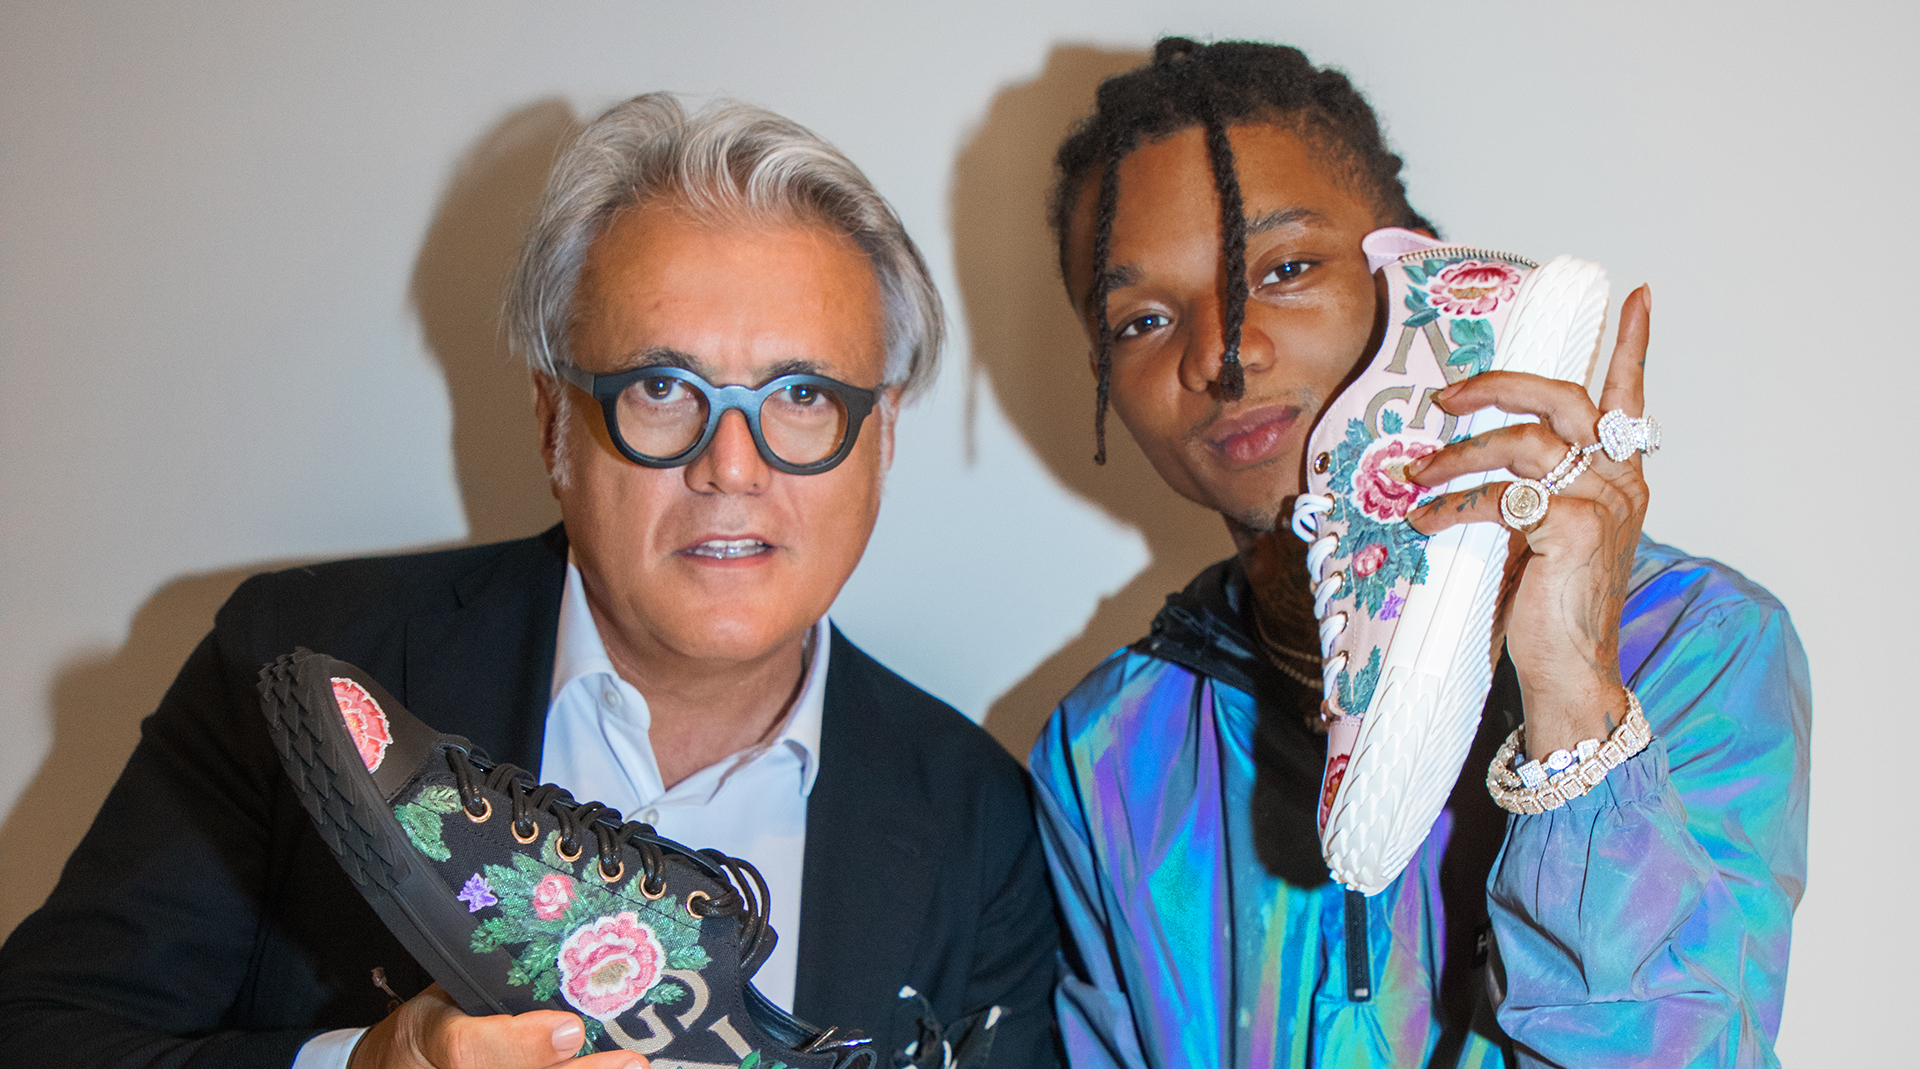 Giuseppe for Swae Lee Launching in January 2020, an exclusive new footwear  collection by Giuseppe Zanotti and Swae Lee